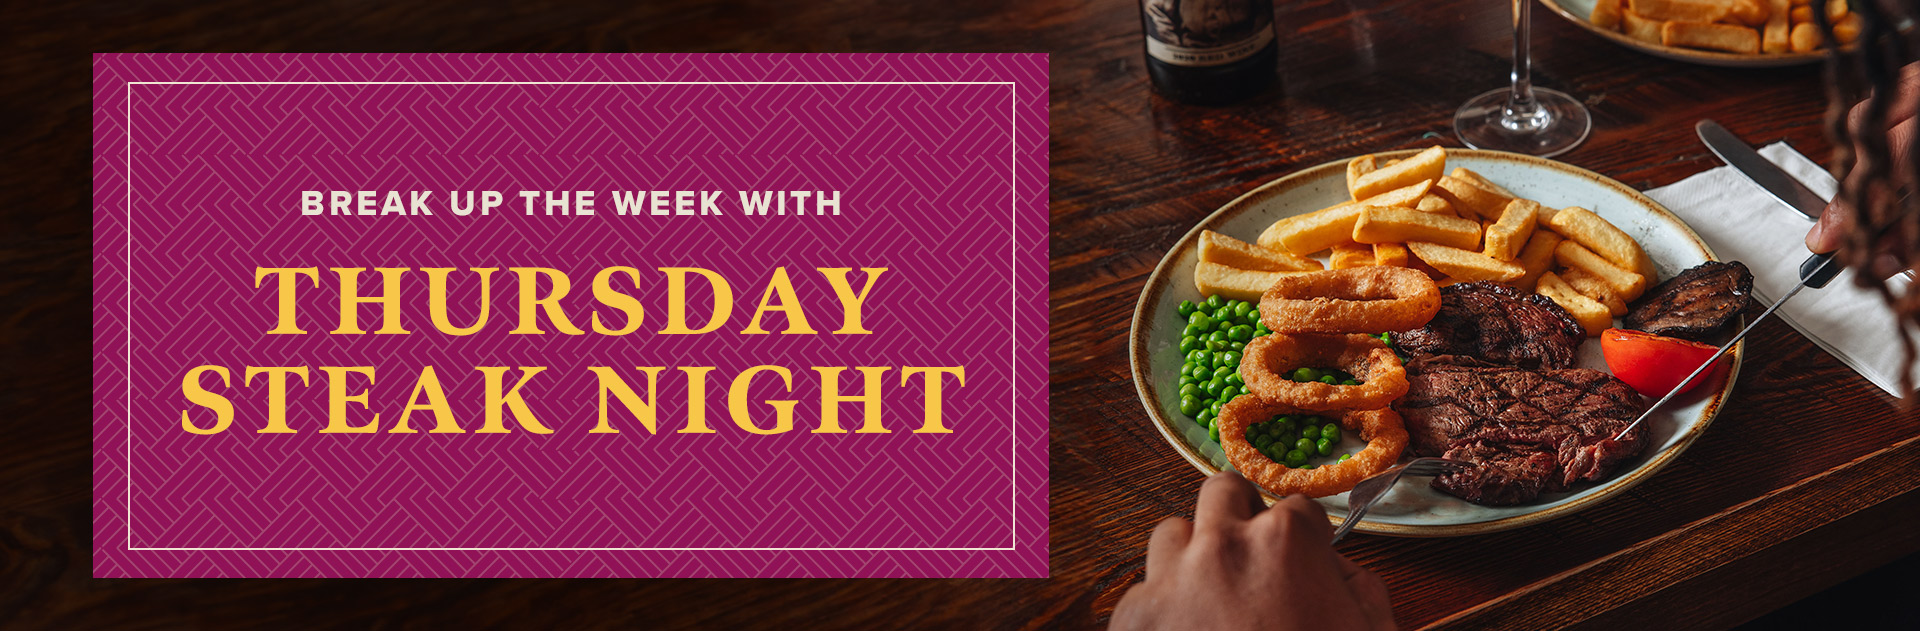 Thursday Steak Night at The Bowling Green